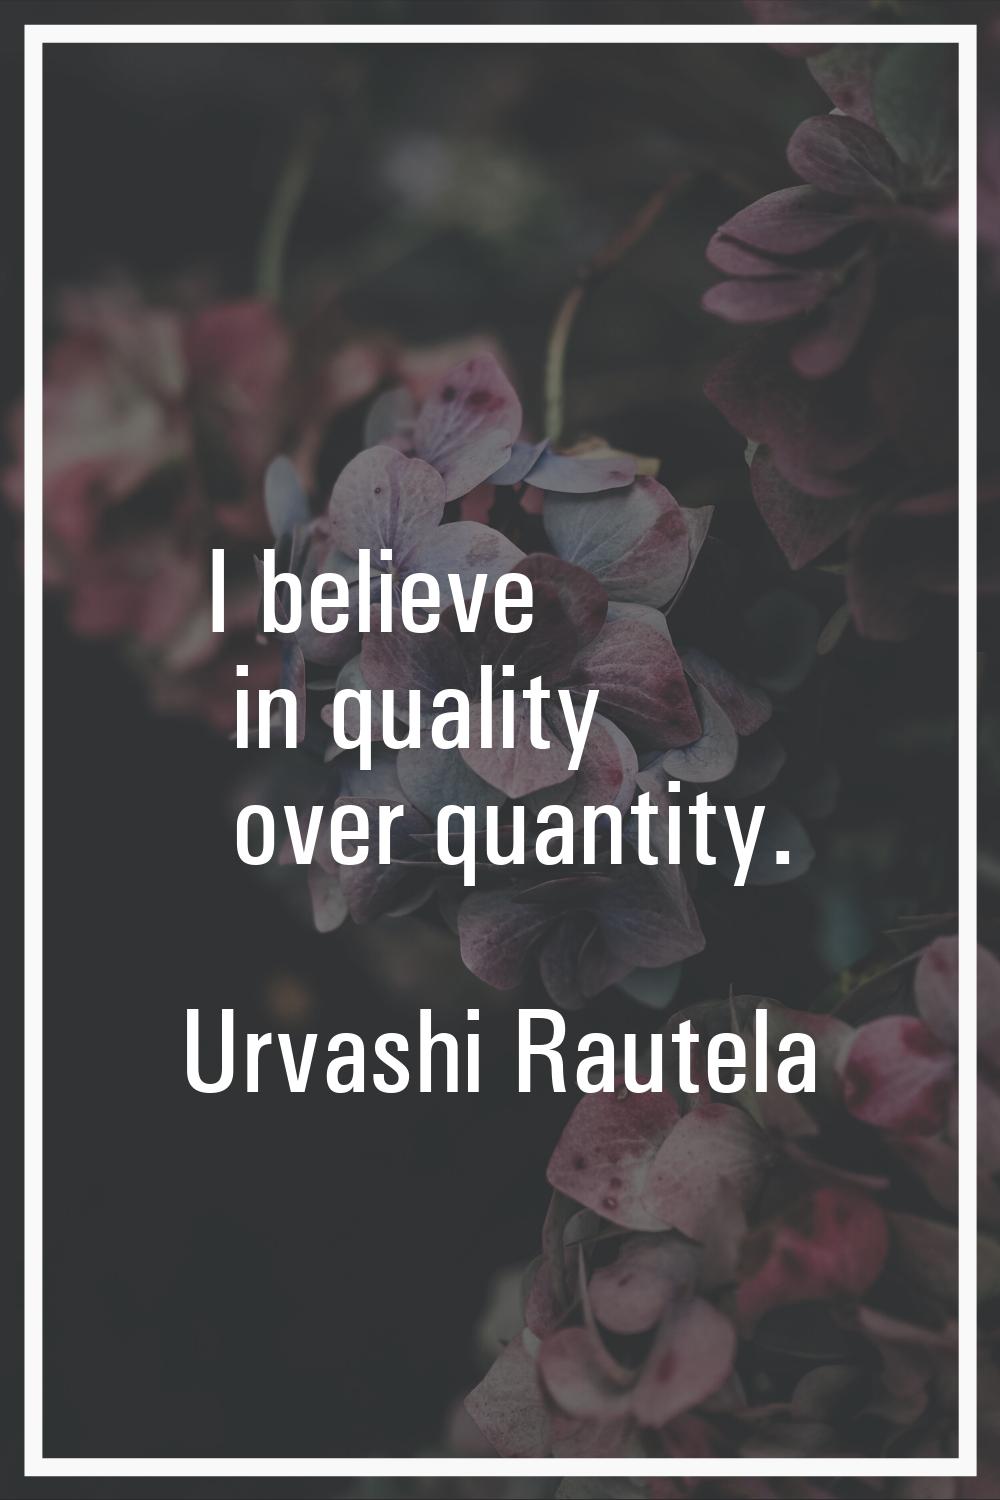 I believe in quality over quantity.